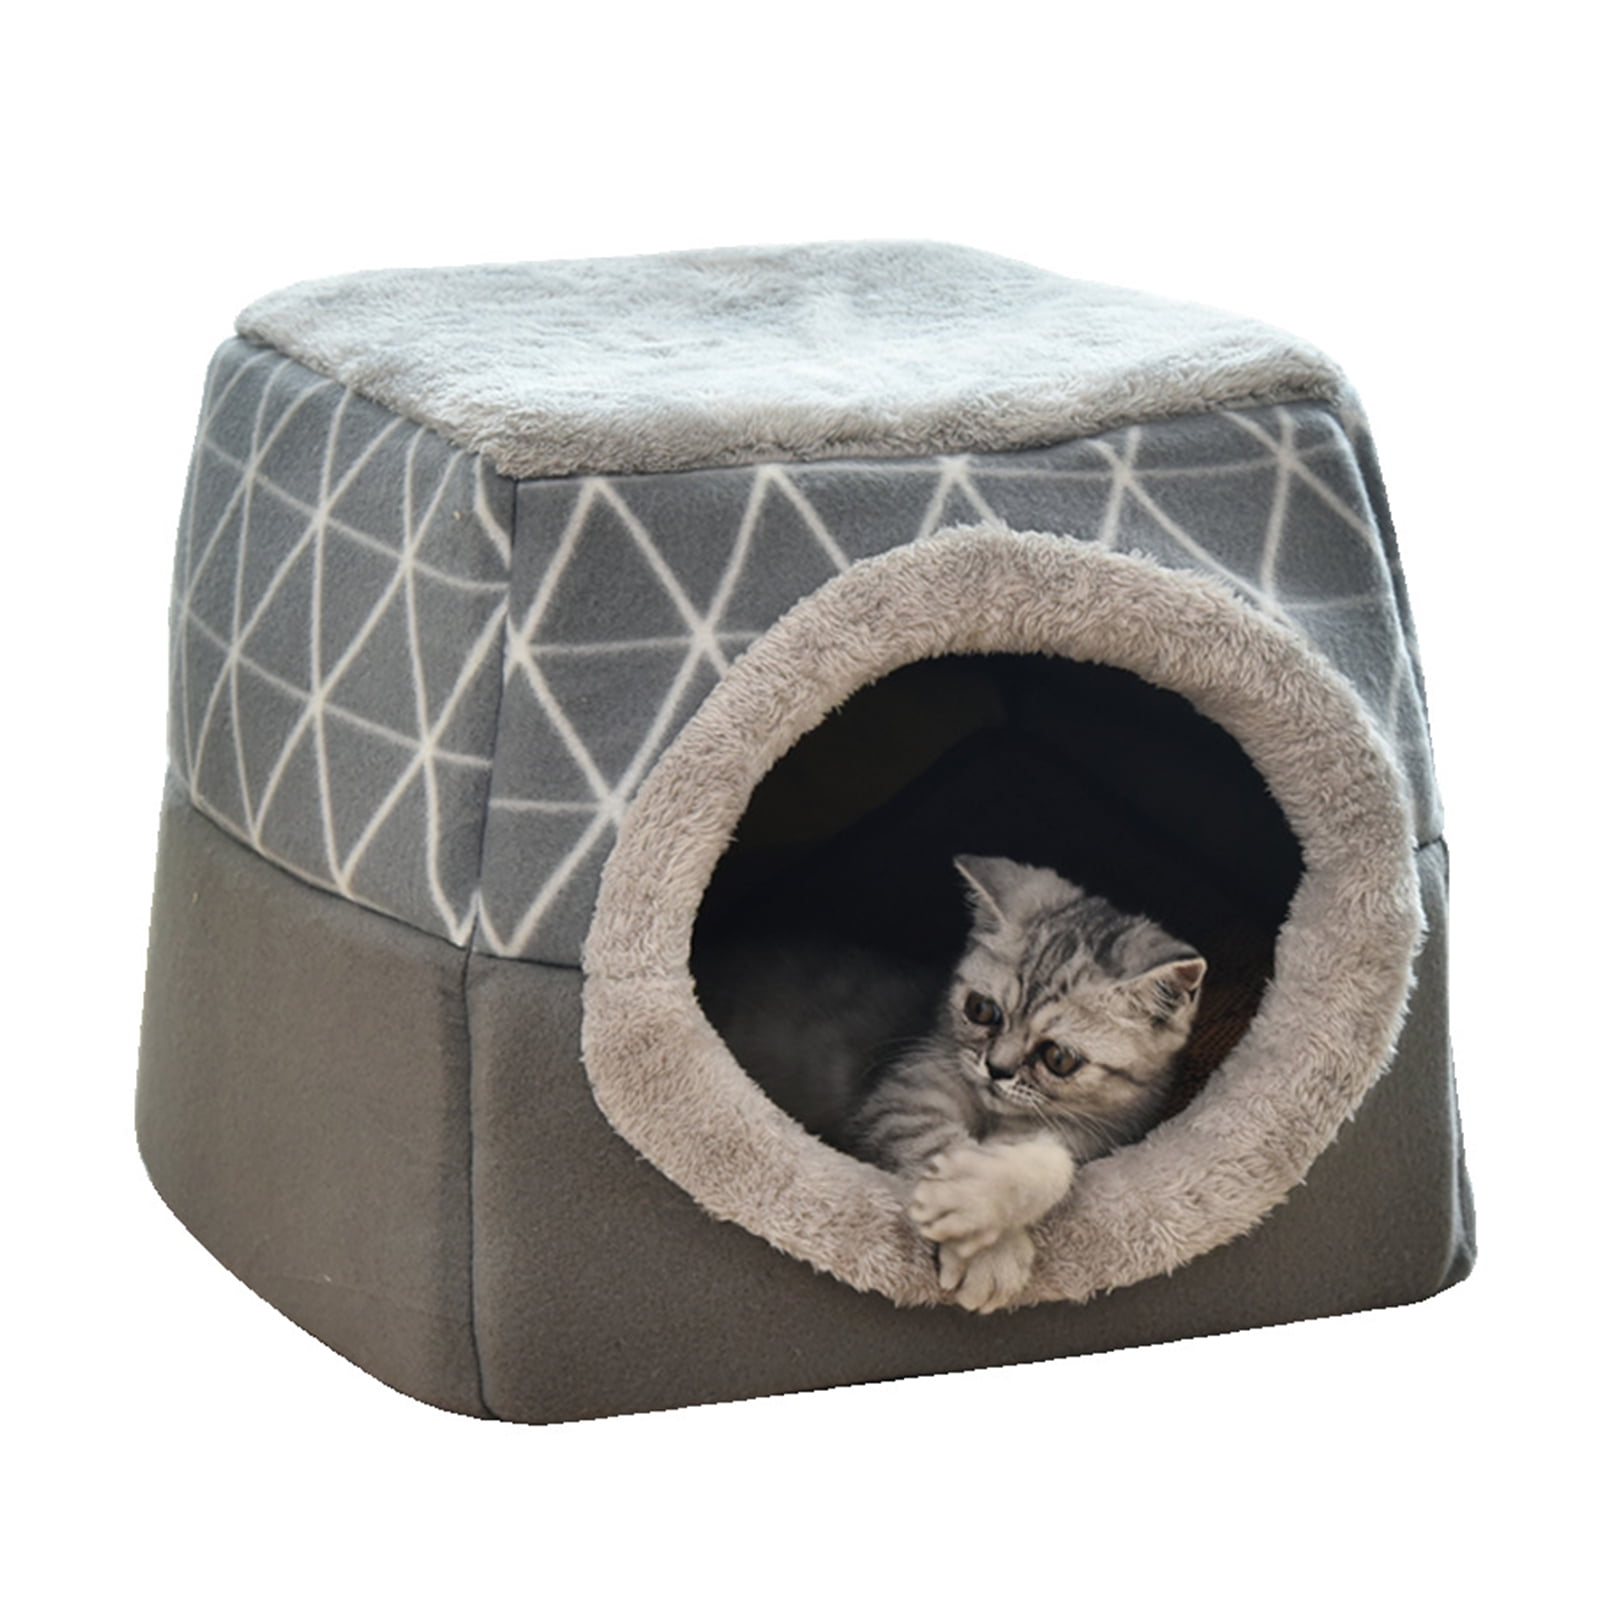 New Pet Igloo Dog Cat Bed House Kennel Doggy Fashion Cushion Pad With Mat 